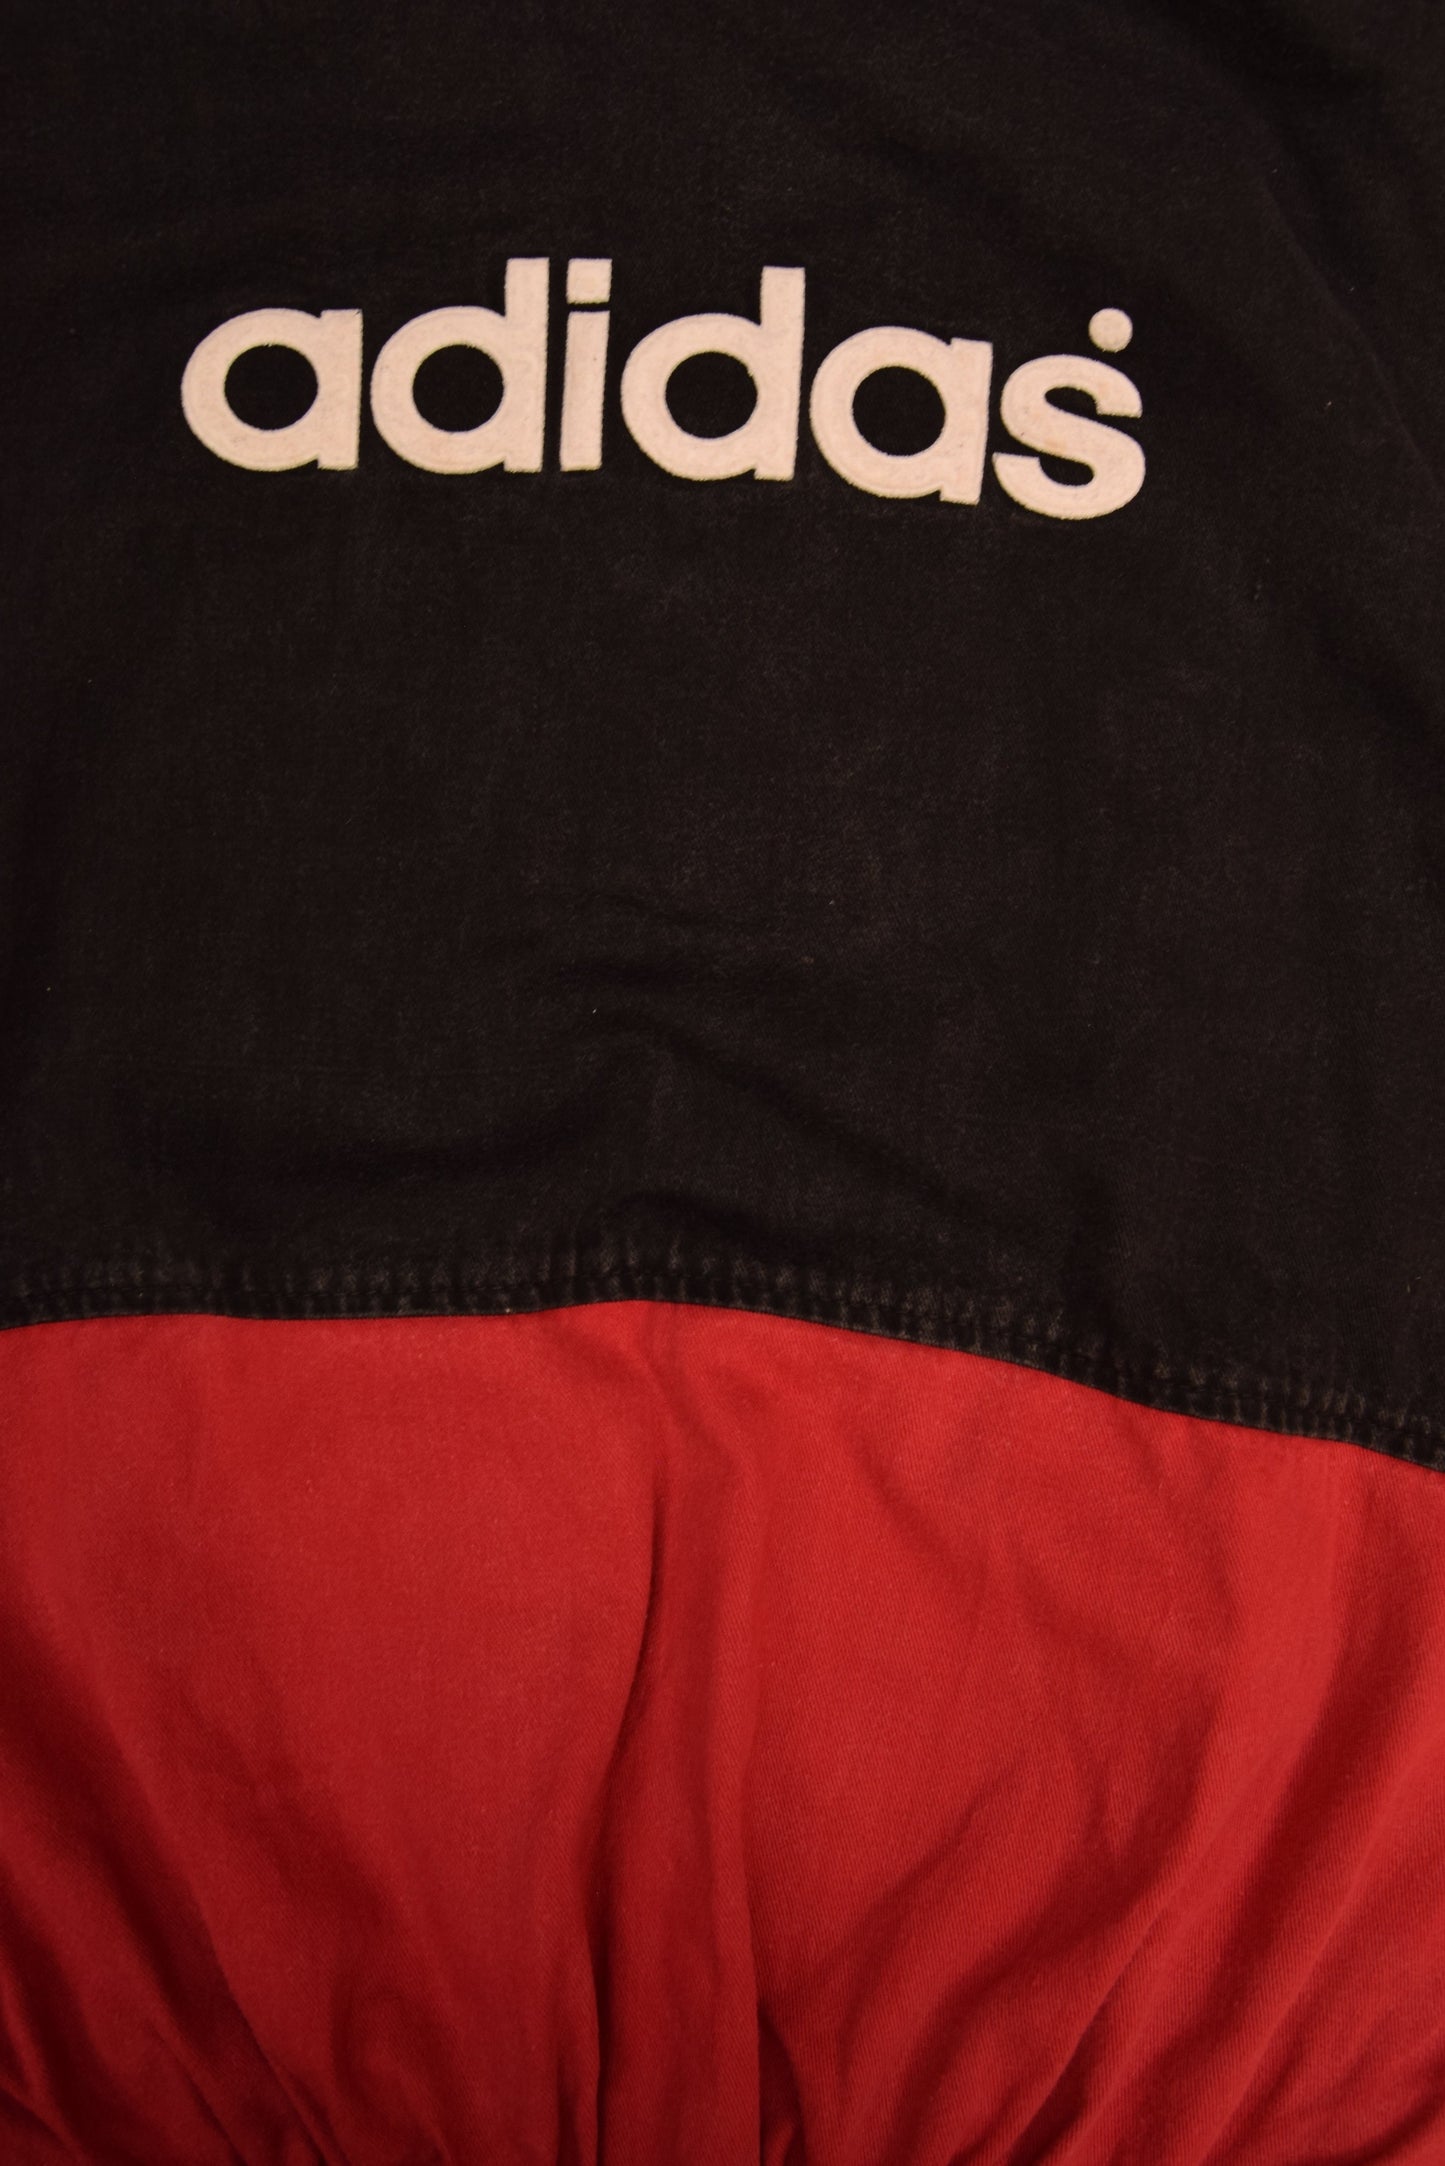 Vintage 90's Adidas Boxy Sweatshirt Drill Top 100% Cotton Heavy Cotton Workwear Fabric Size Made in UK Size S - M